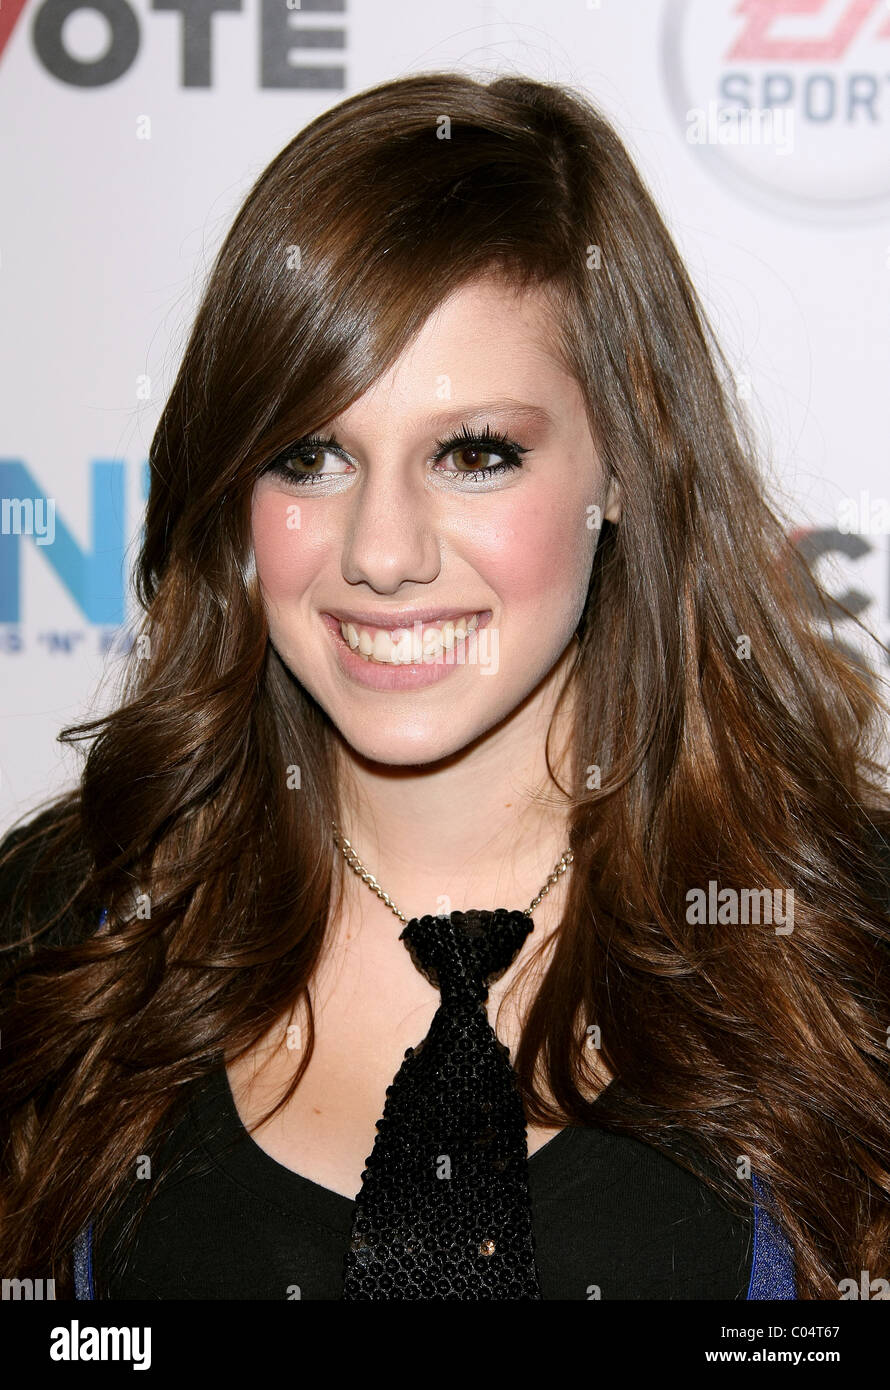 AVERY FRIENDS N FAMILY 14TH ANNUAL PRE GRAMMY EVENT HOLLYWOOD LOS ANGELES CALIFORNIA USA 11 February 2011 Stock Photo